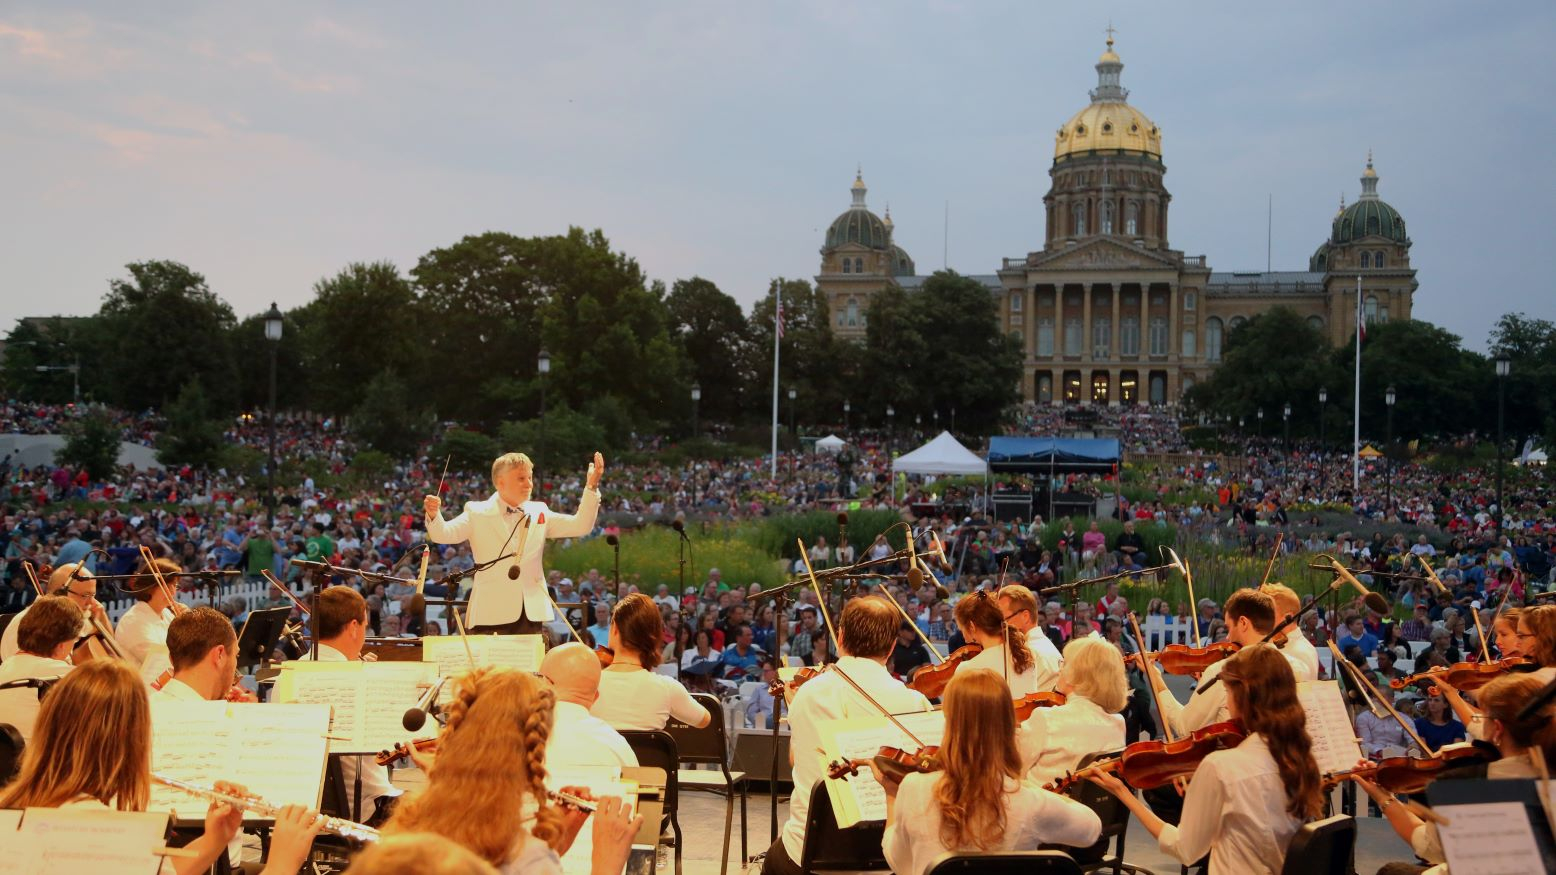 Iowa PBS offers live coverage of Yankee Doodle Pops! Iowa PBS